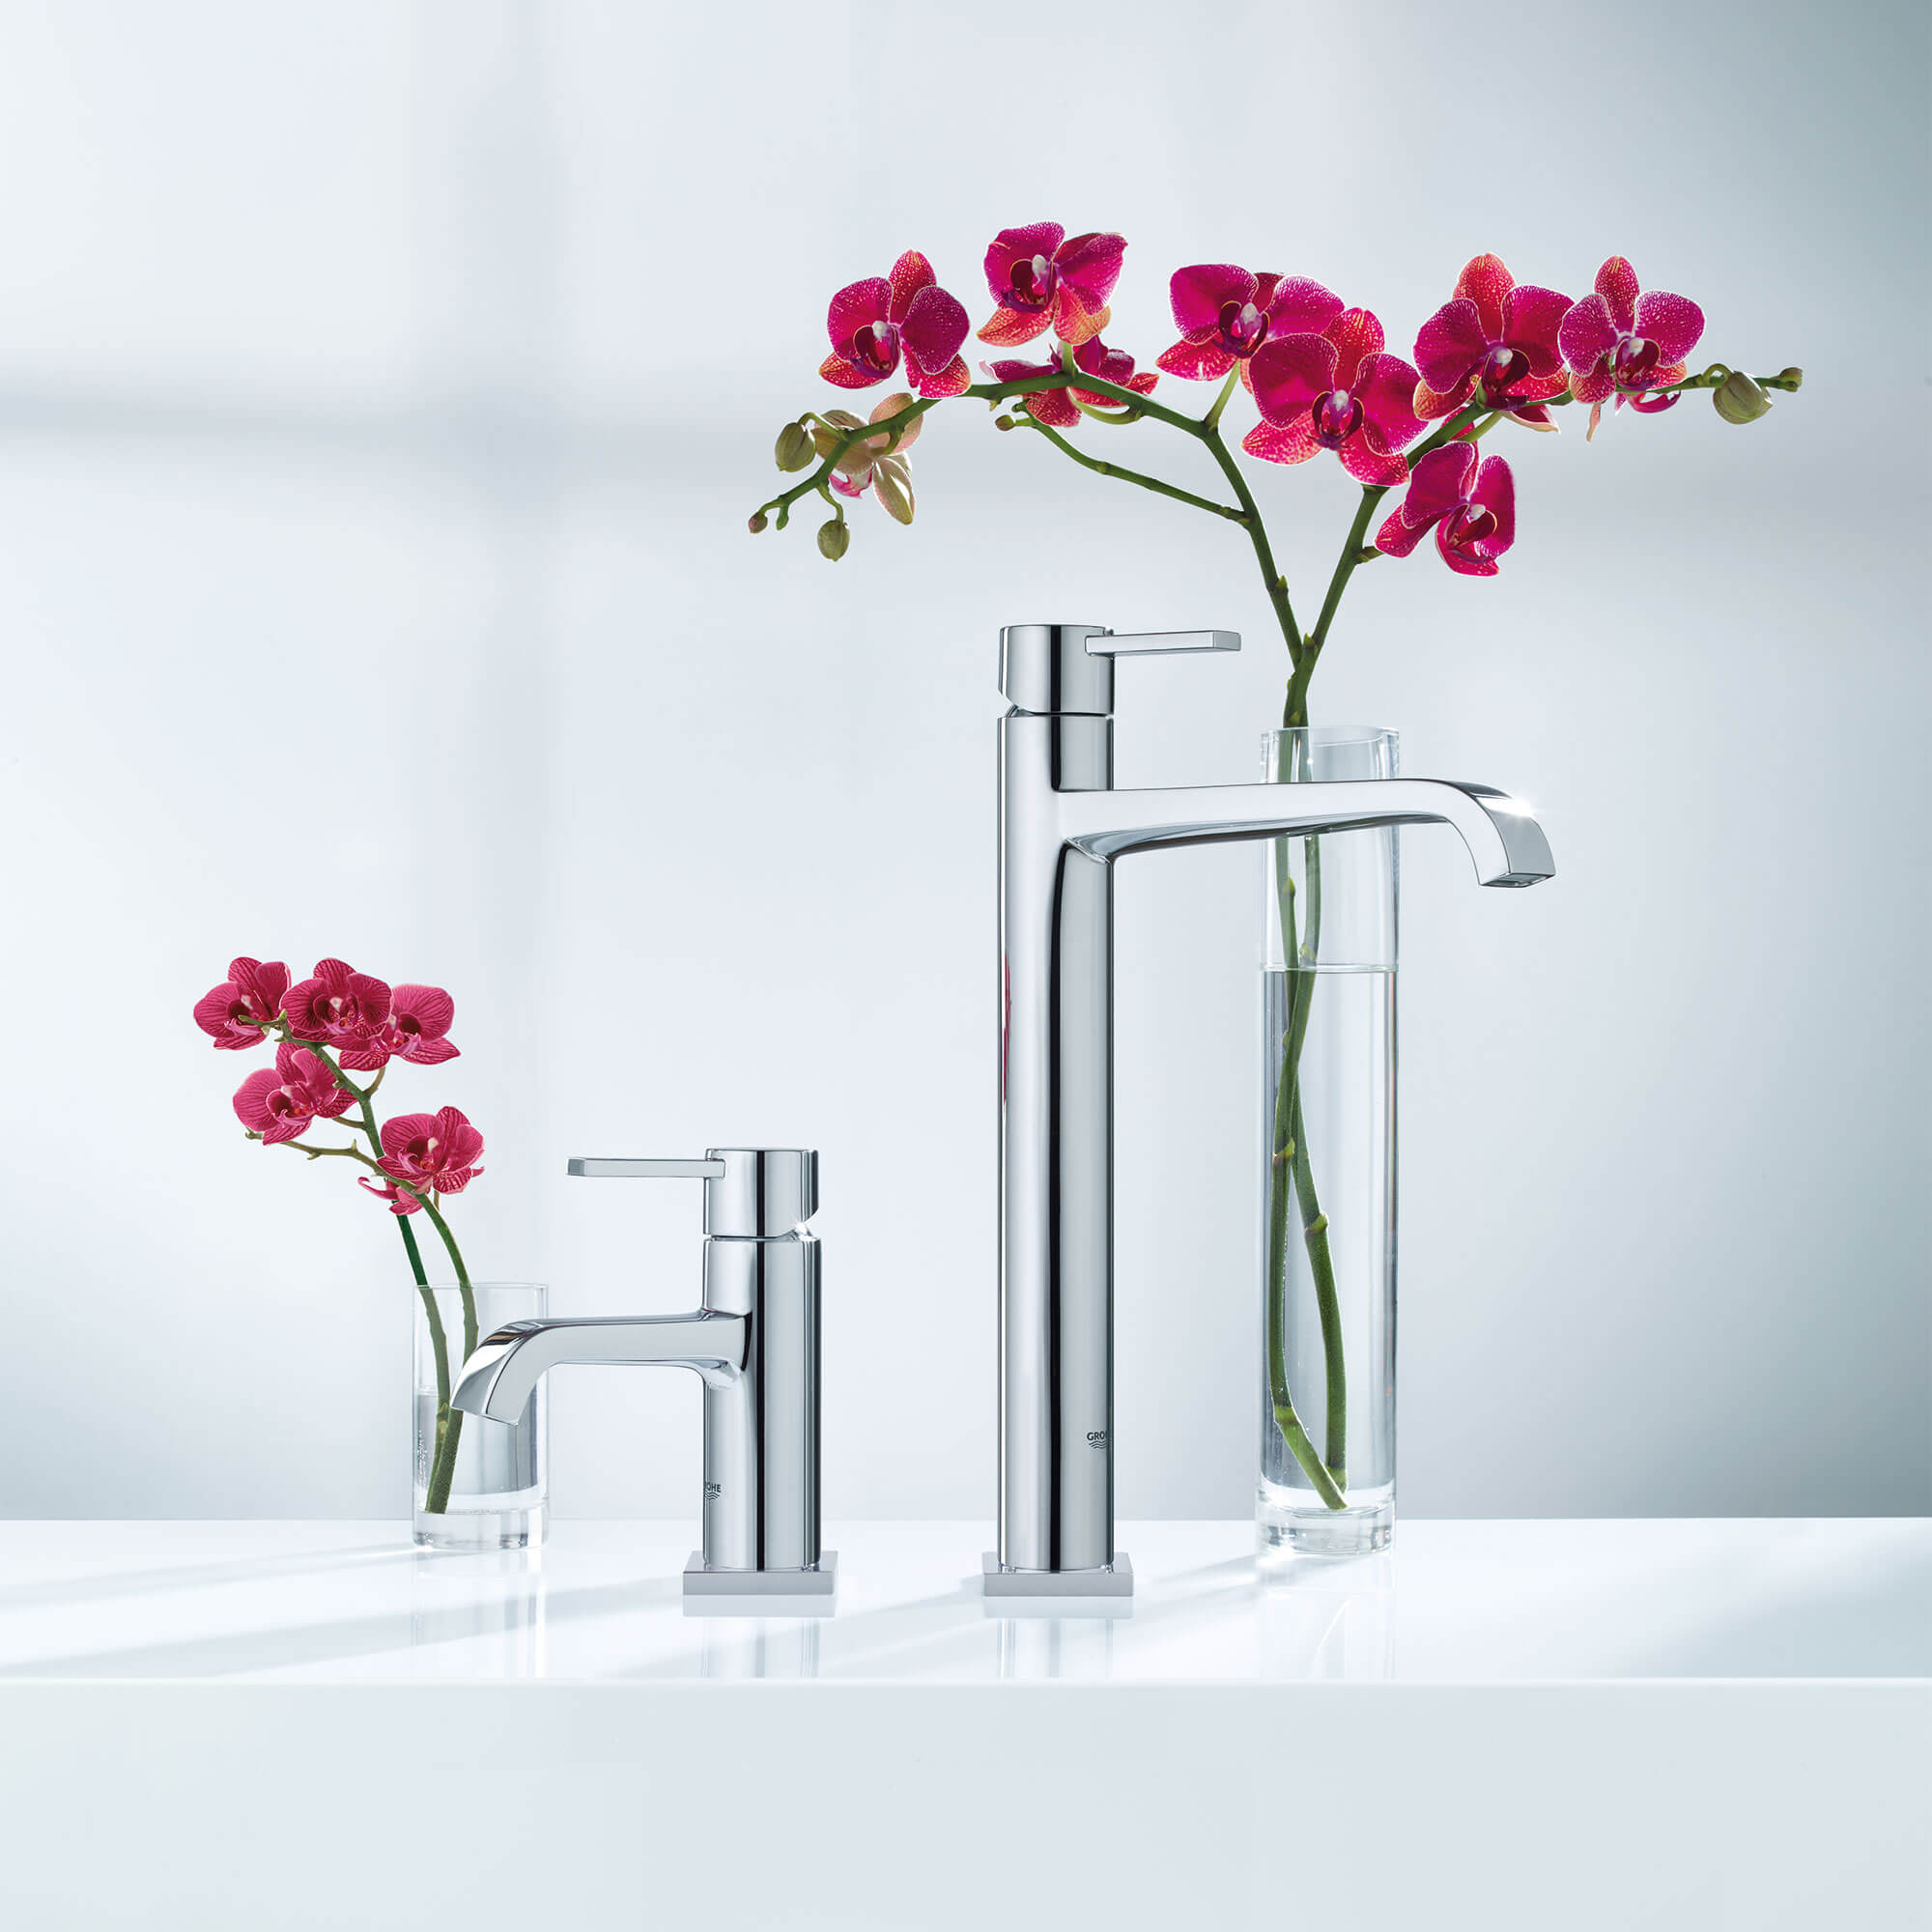 Faucet sizes from small to x-large next to flower vases.